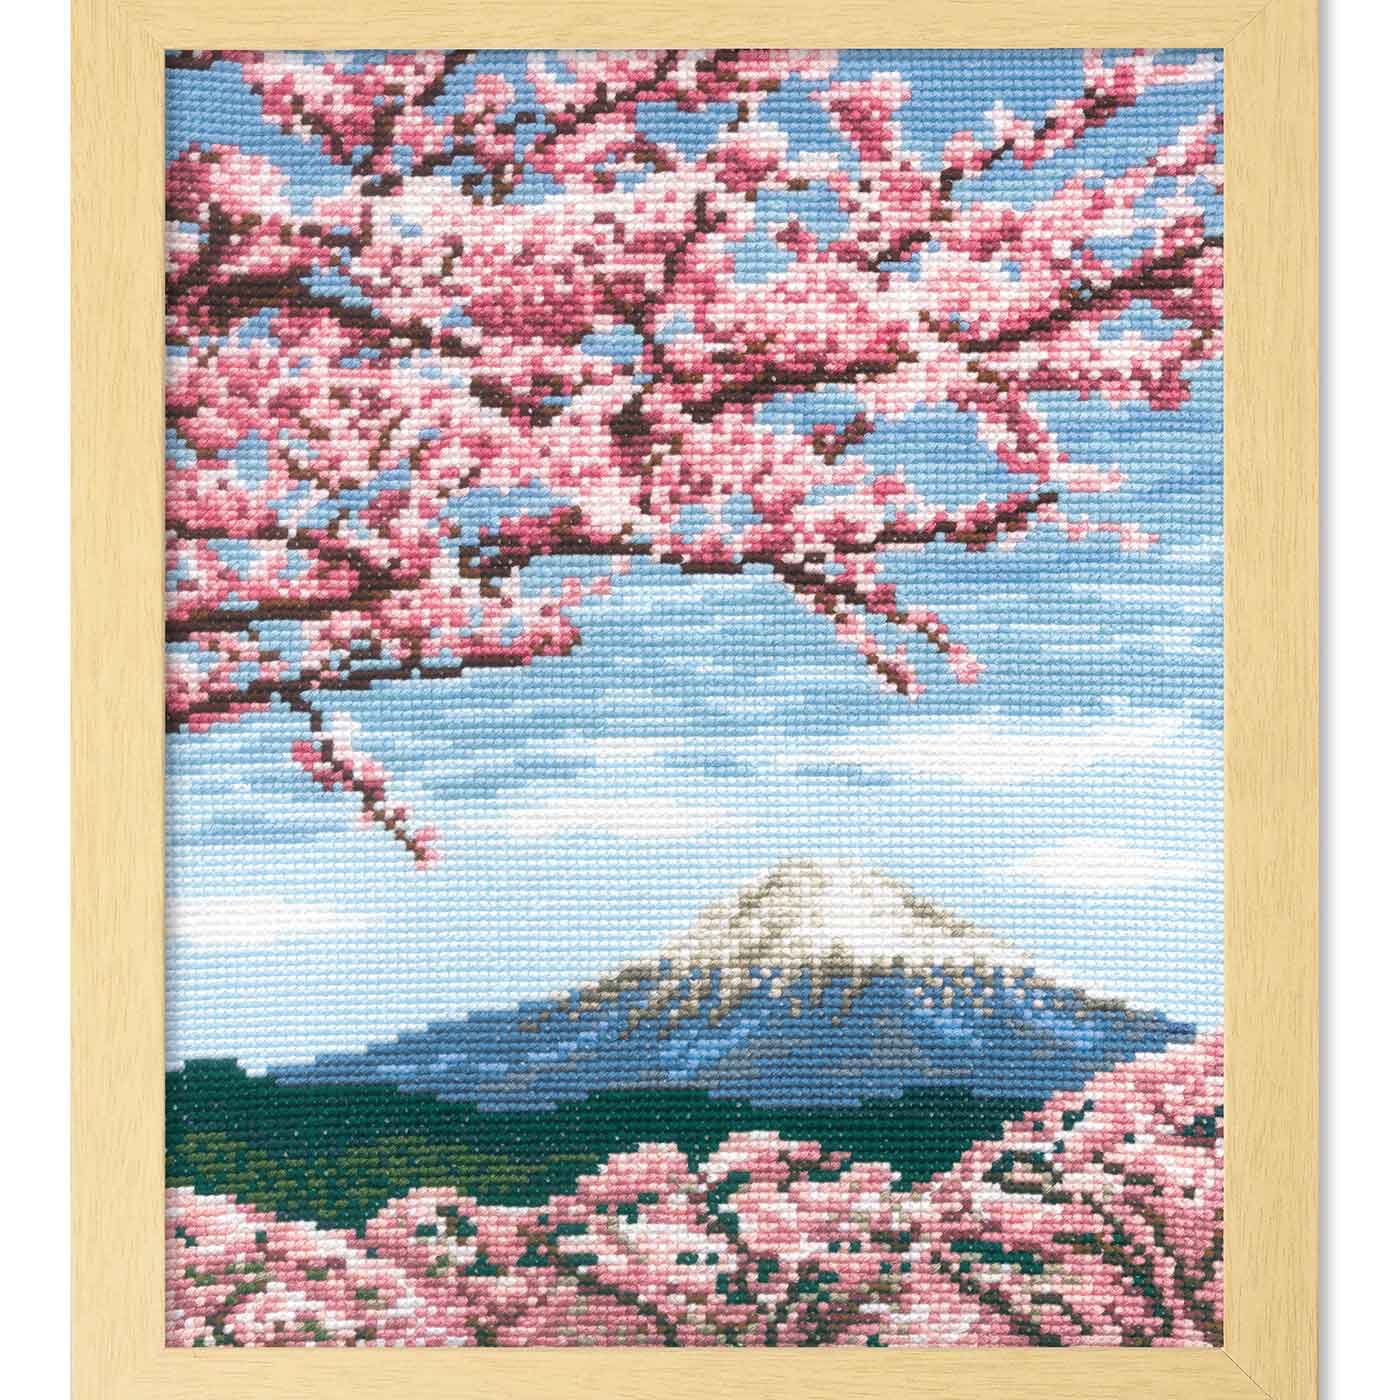 Couturier special|大きめのマス目で刺しやすい　日本の風景「桜と富士山」クロスステッチキット|9カウントのクロスステッチ。